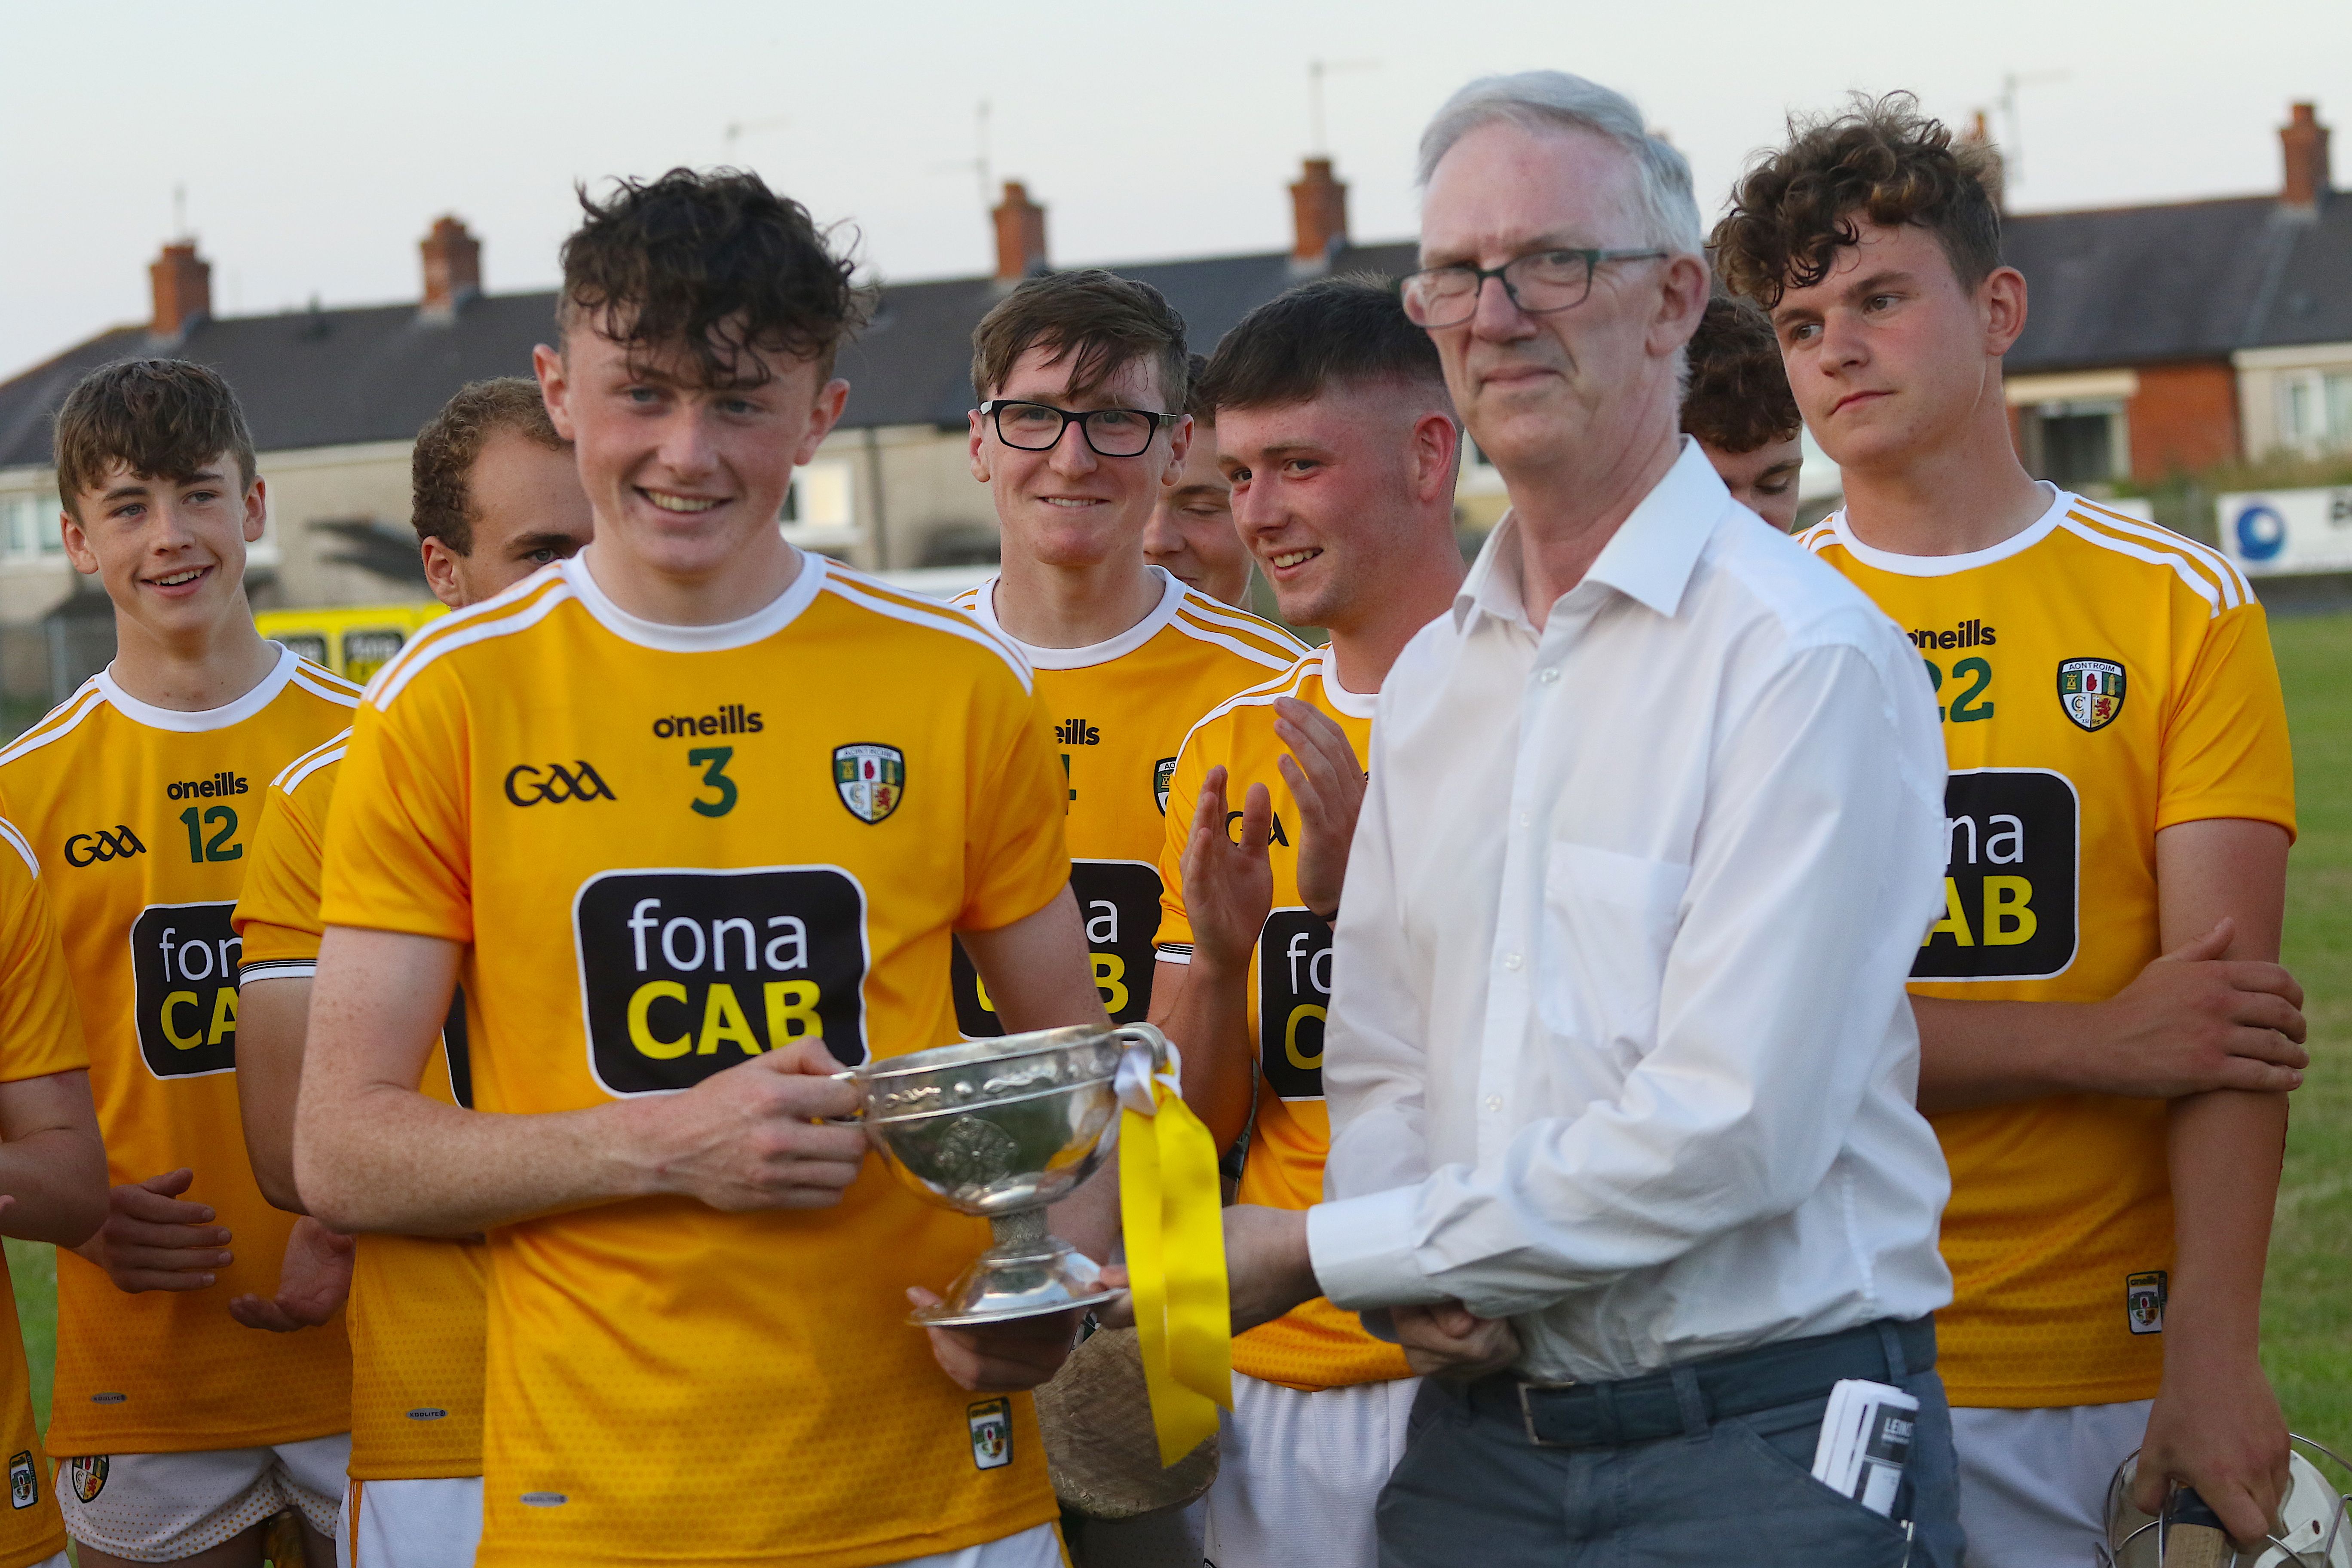 Antrim captain, Ruairi McCormick, is presented with the trophy